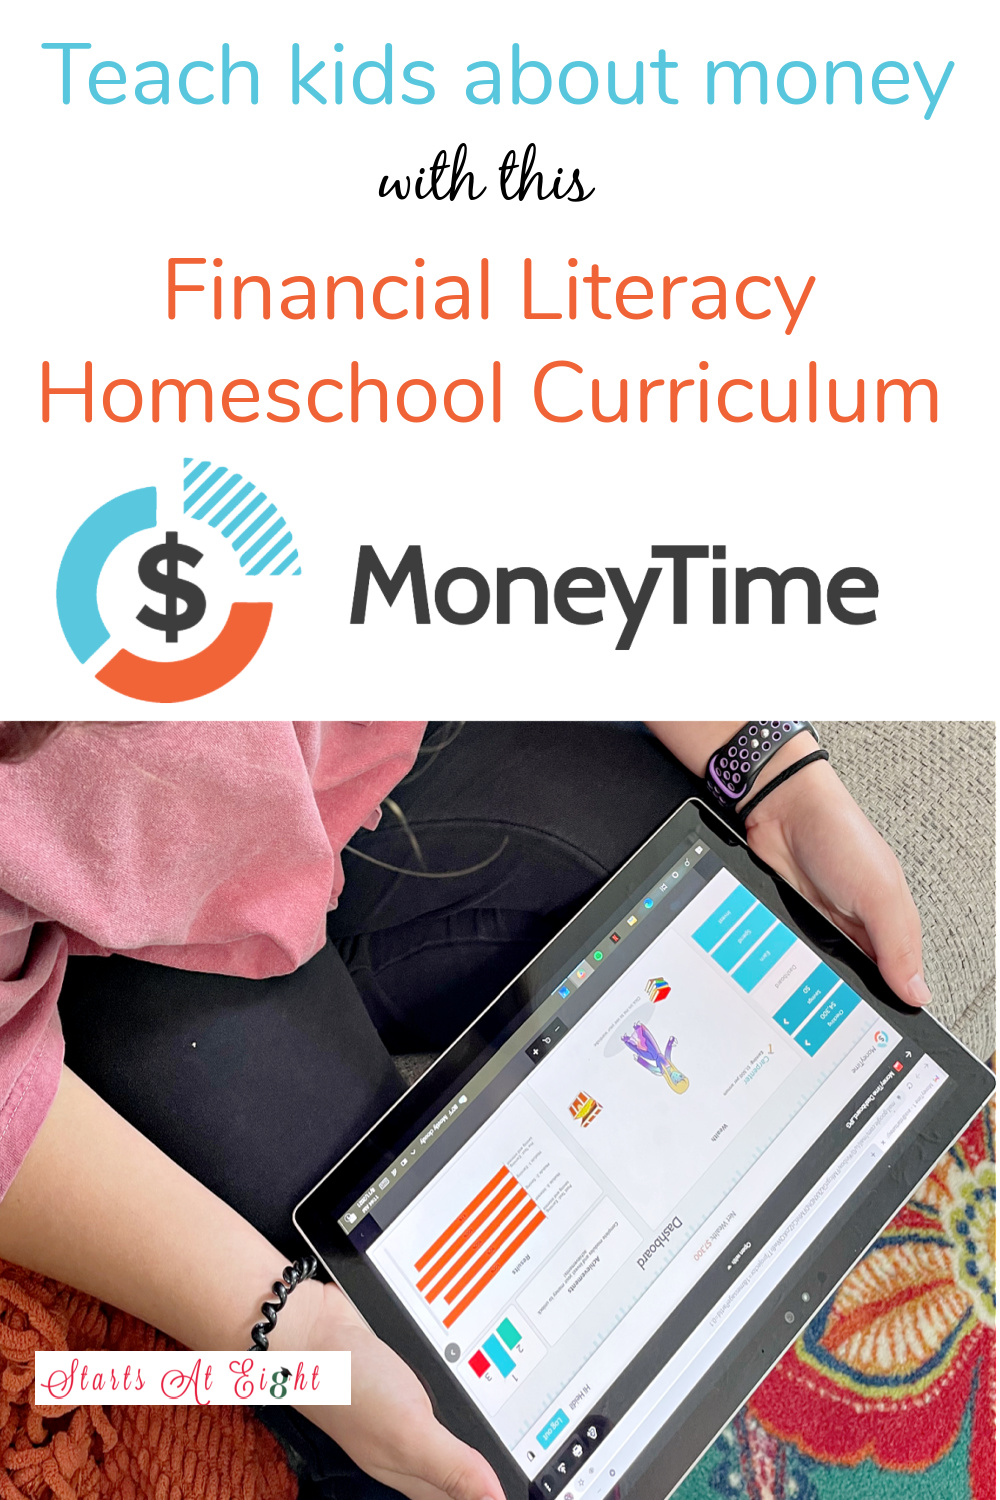 Teach Kids About Money with the MoneyTime, the online gamified Financial Literacy Homeschool Curriculum for kids ages 10-14. A review from Starts At Eight.